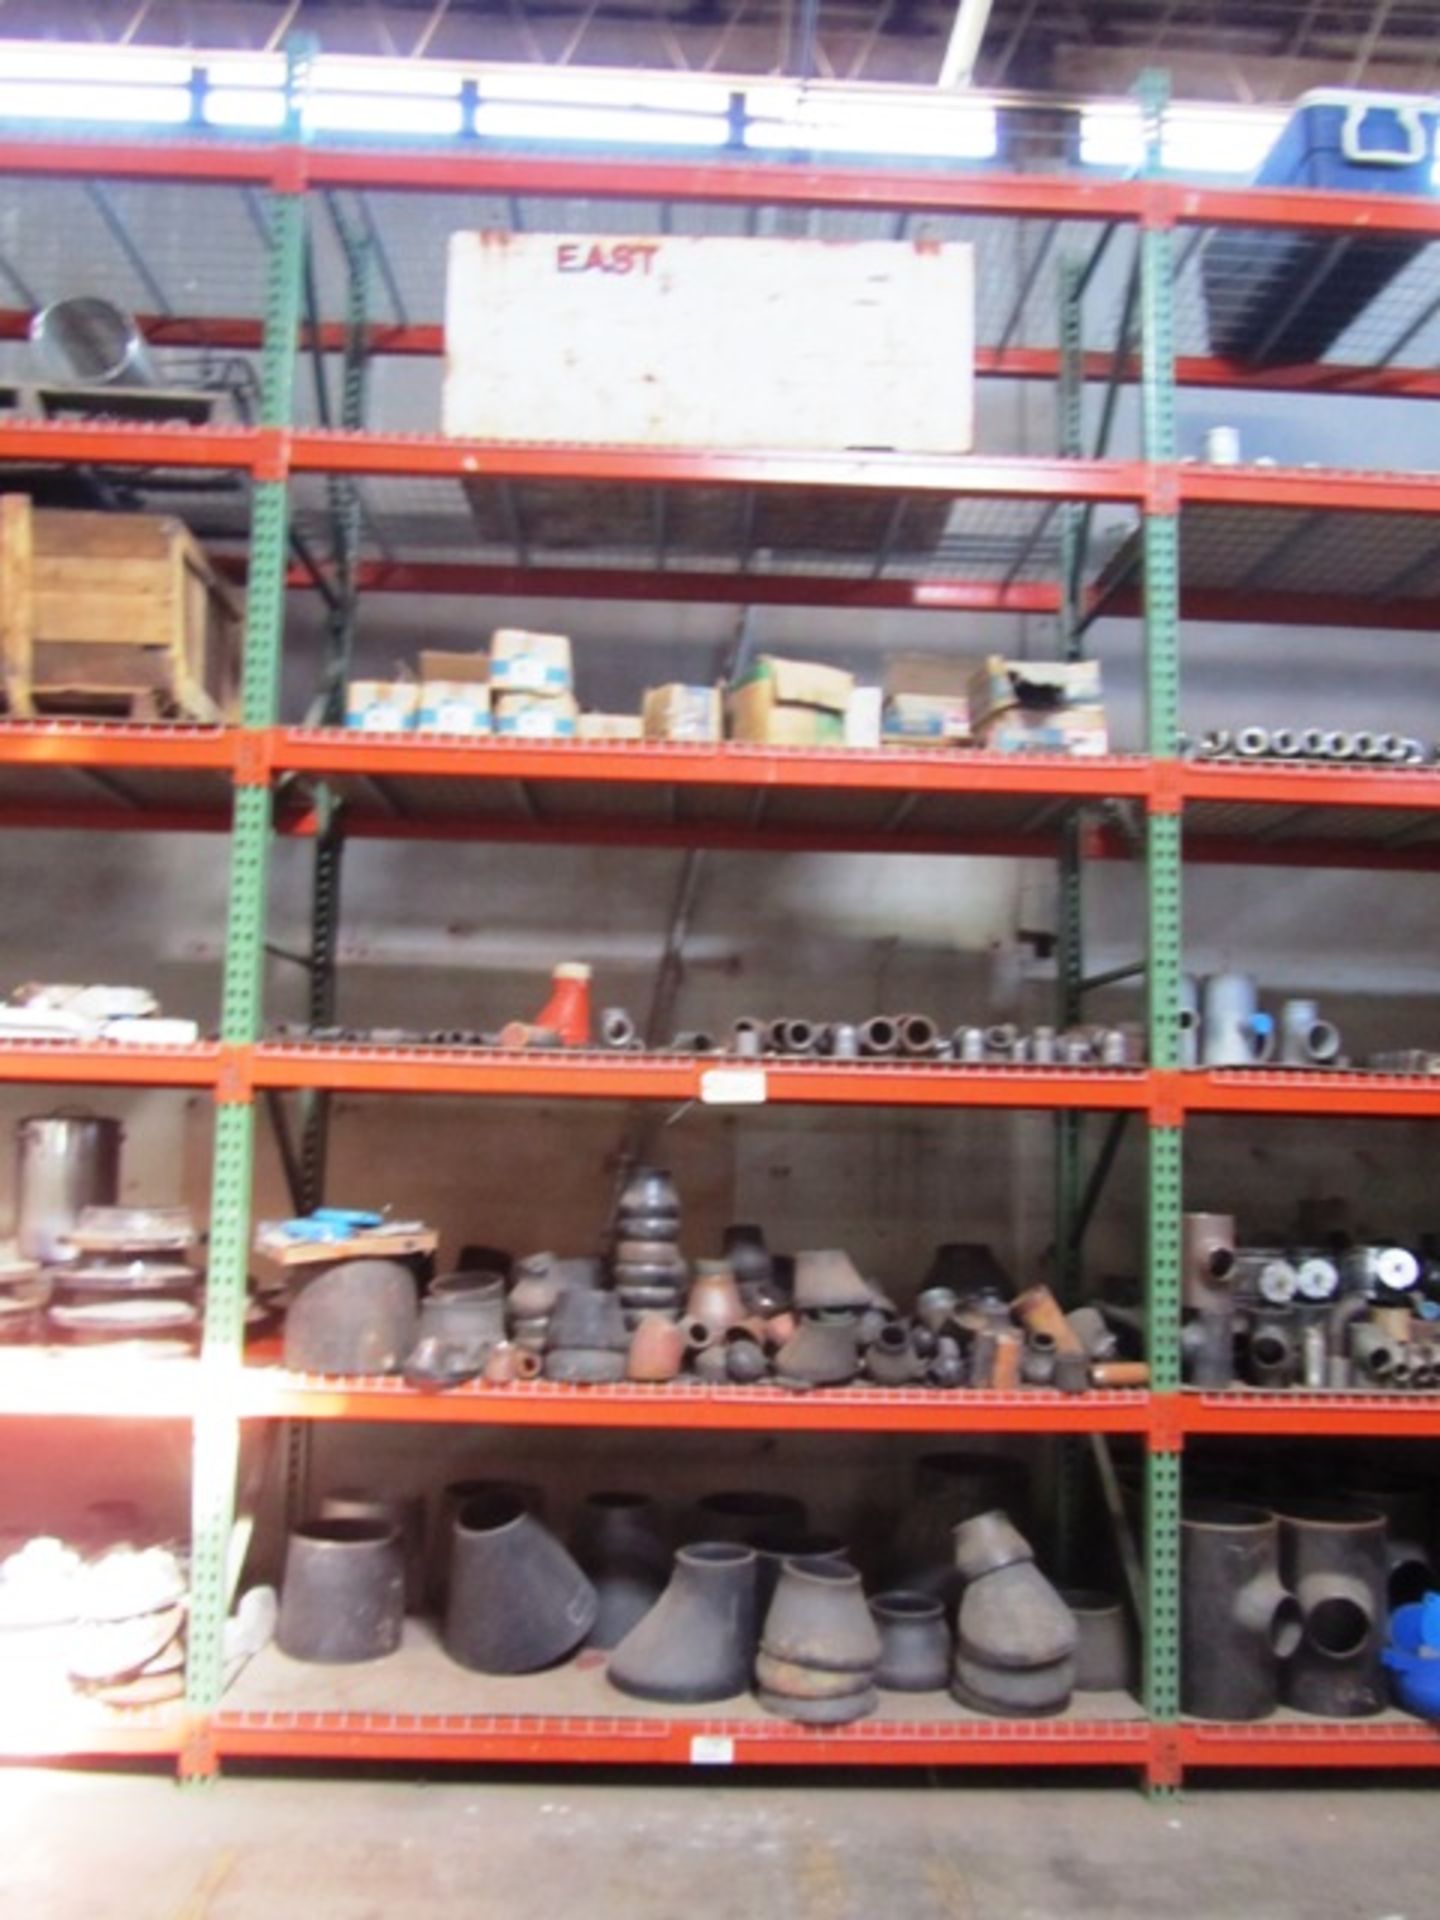 Contents of 5 Vertical Sections Pallet Racking consisting of Metal Parts, Metal Tank